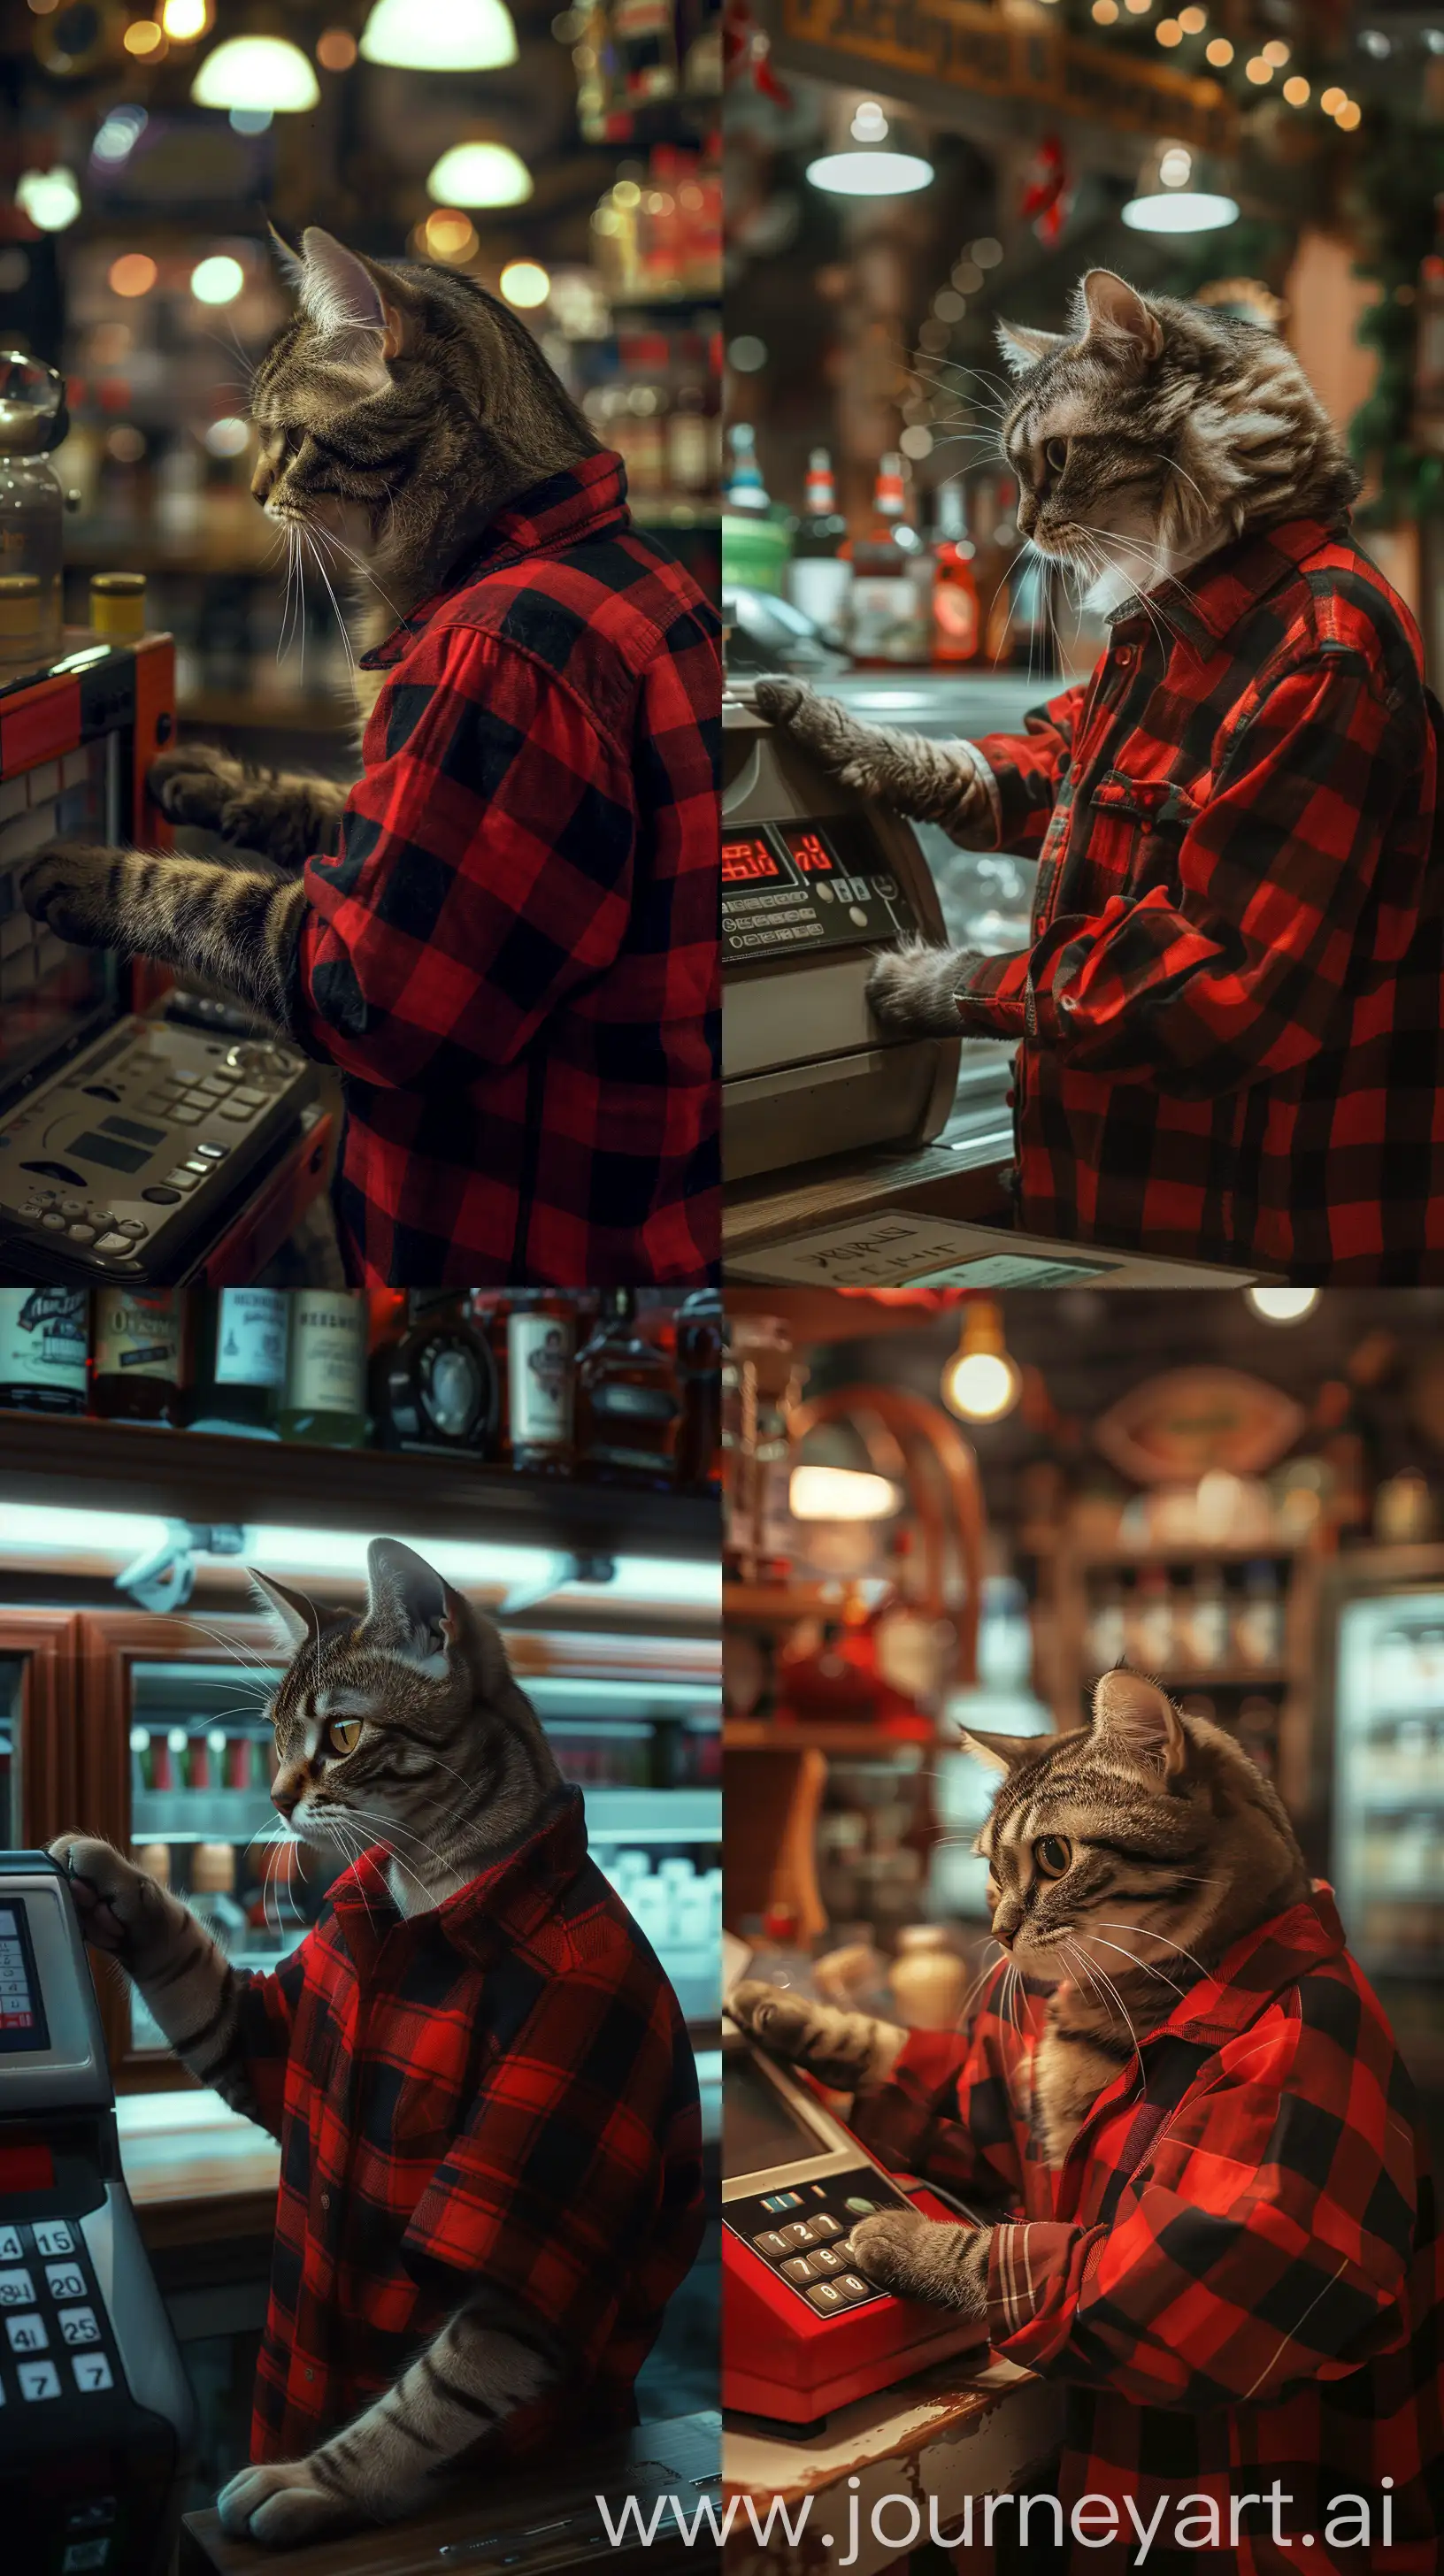 Russian-Aleomarket-Cat-Employee-in-Red-and-Black-Plaid-Shirt-at-Cash-Register